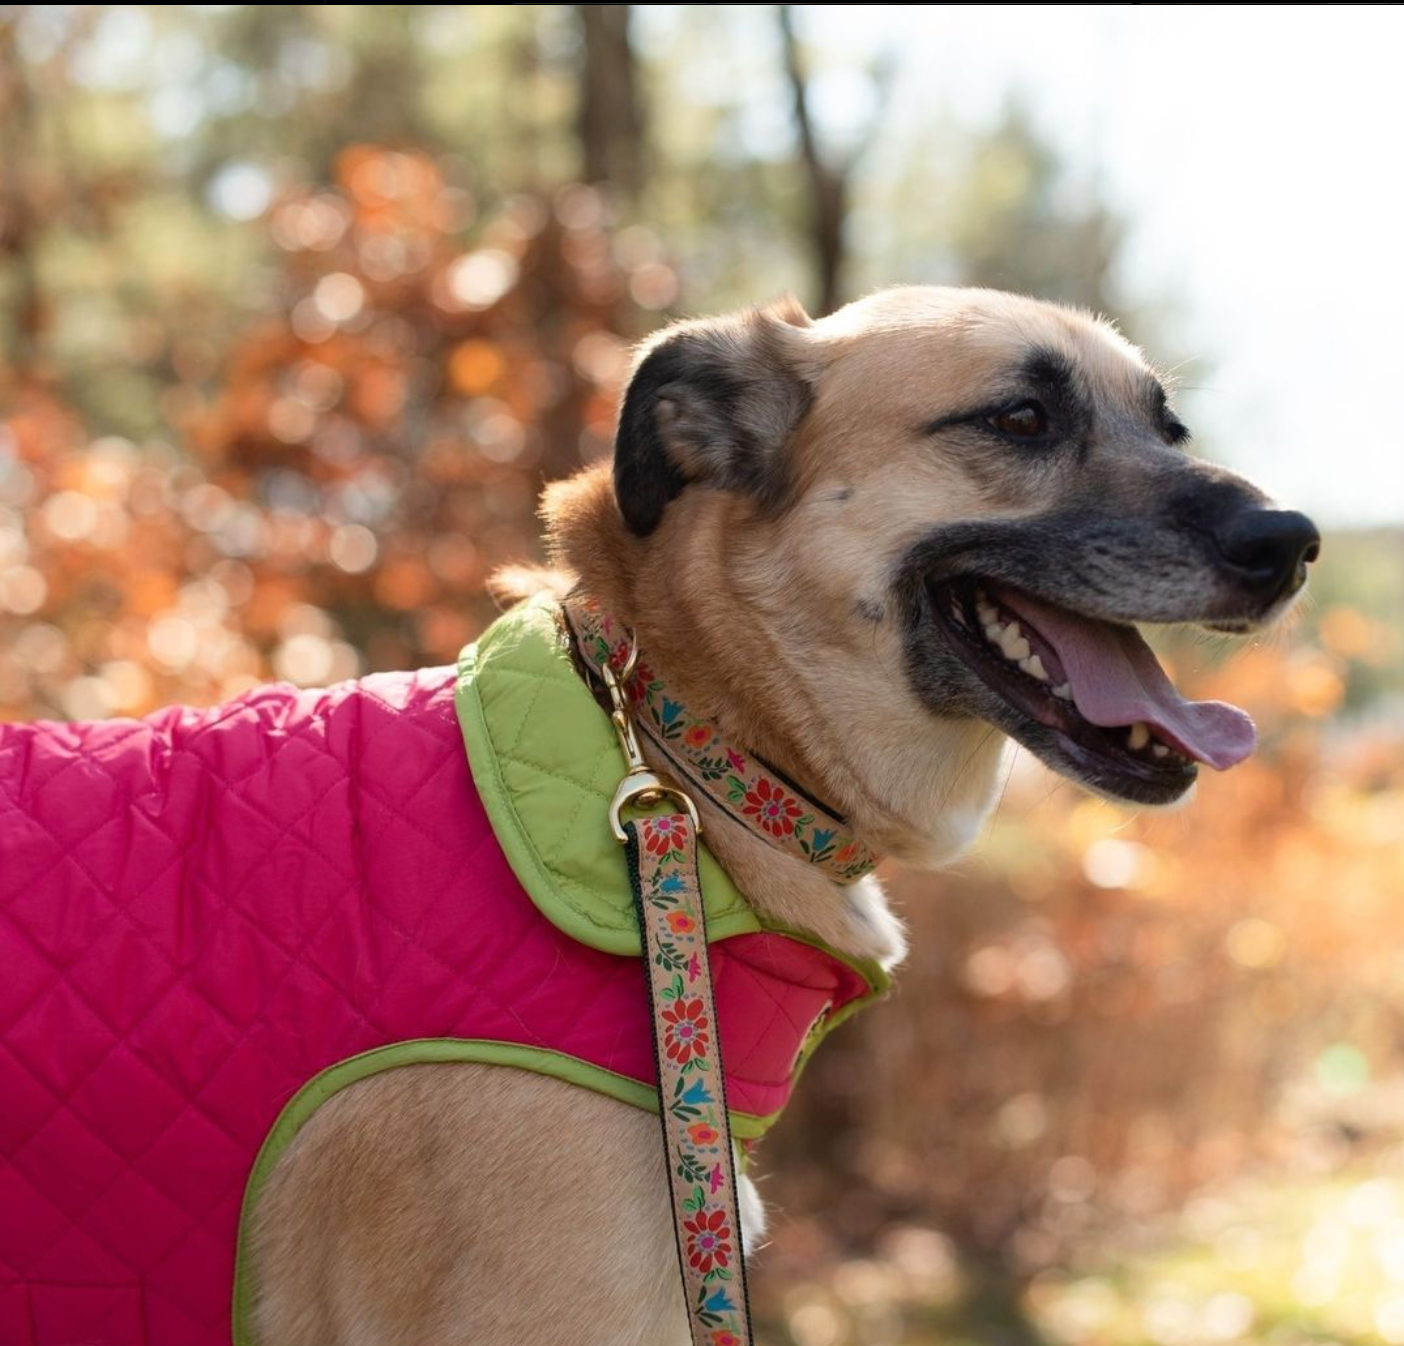 BRIGHT-PINK-LIME-DOG-COAT-TAPESTRY-FLORAL-COLLAR-LEASH